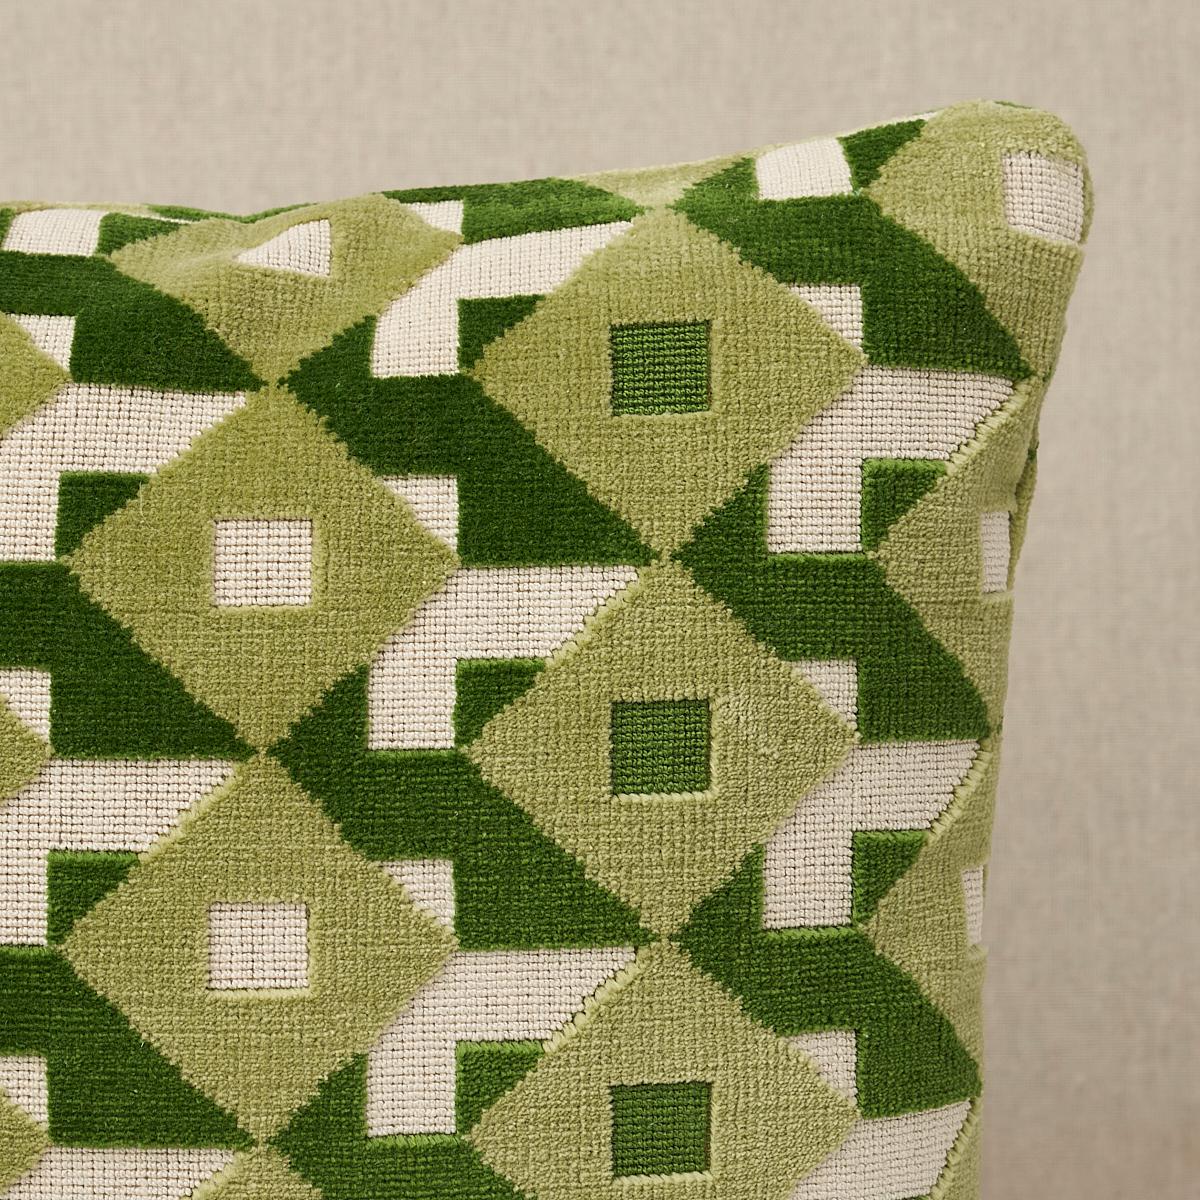 This pillow features Dazzle Ship Velvet by Johnson Hartig for Schumacher with a knife edge finish. An all-over three-color geometric in verdant reminiscent of Op Art patterns is rendered in cushy cut velvet to create a supremely sophisticated